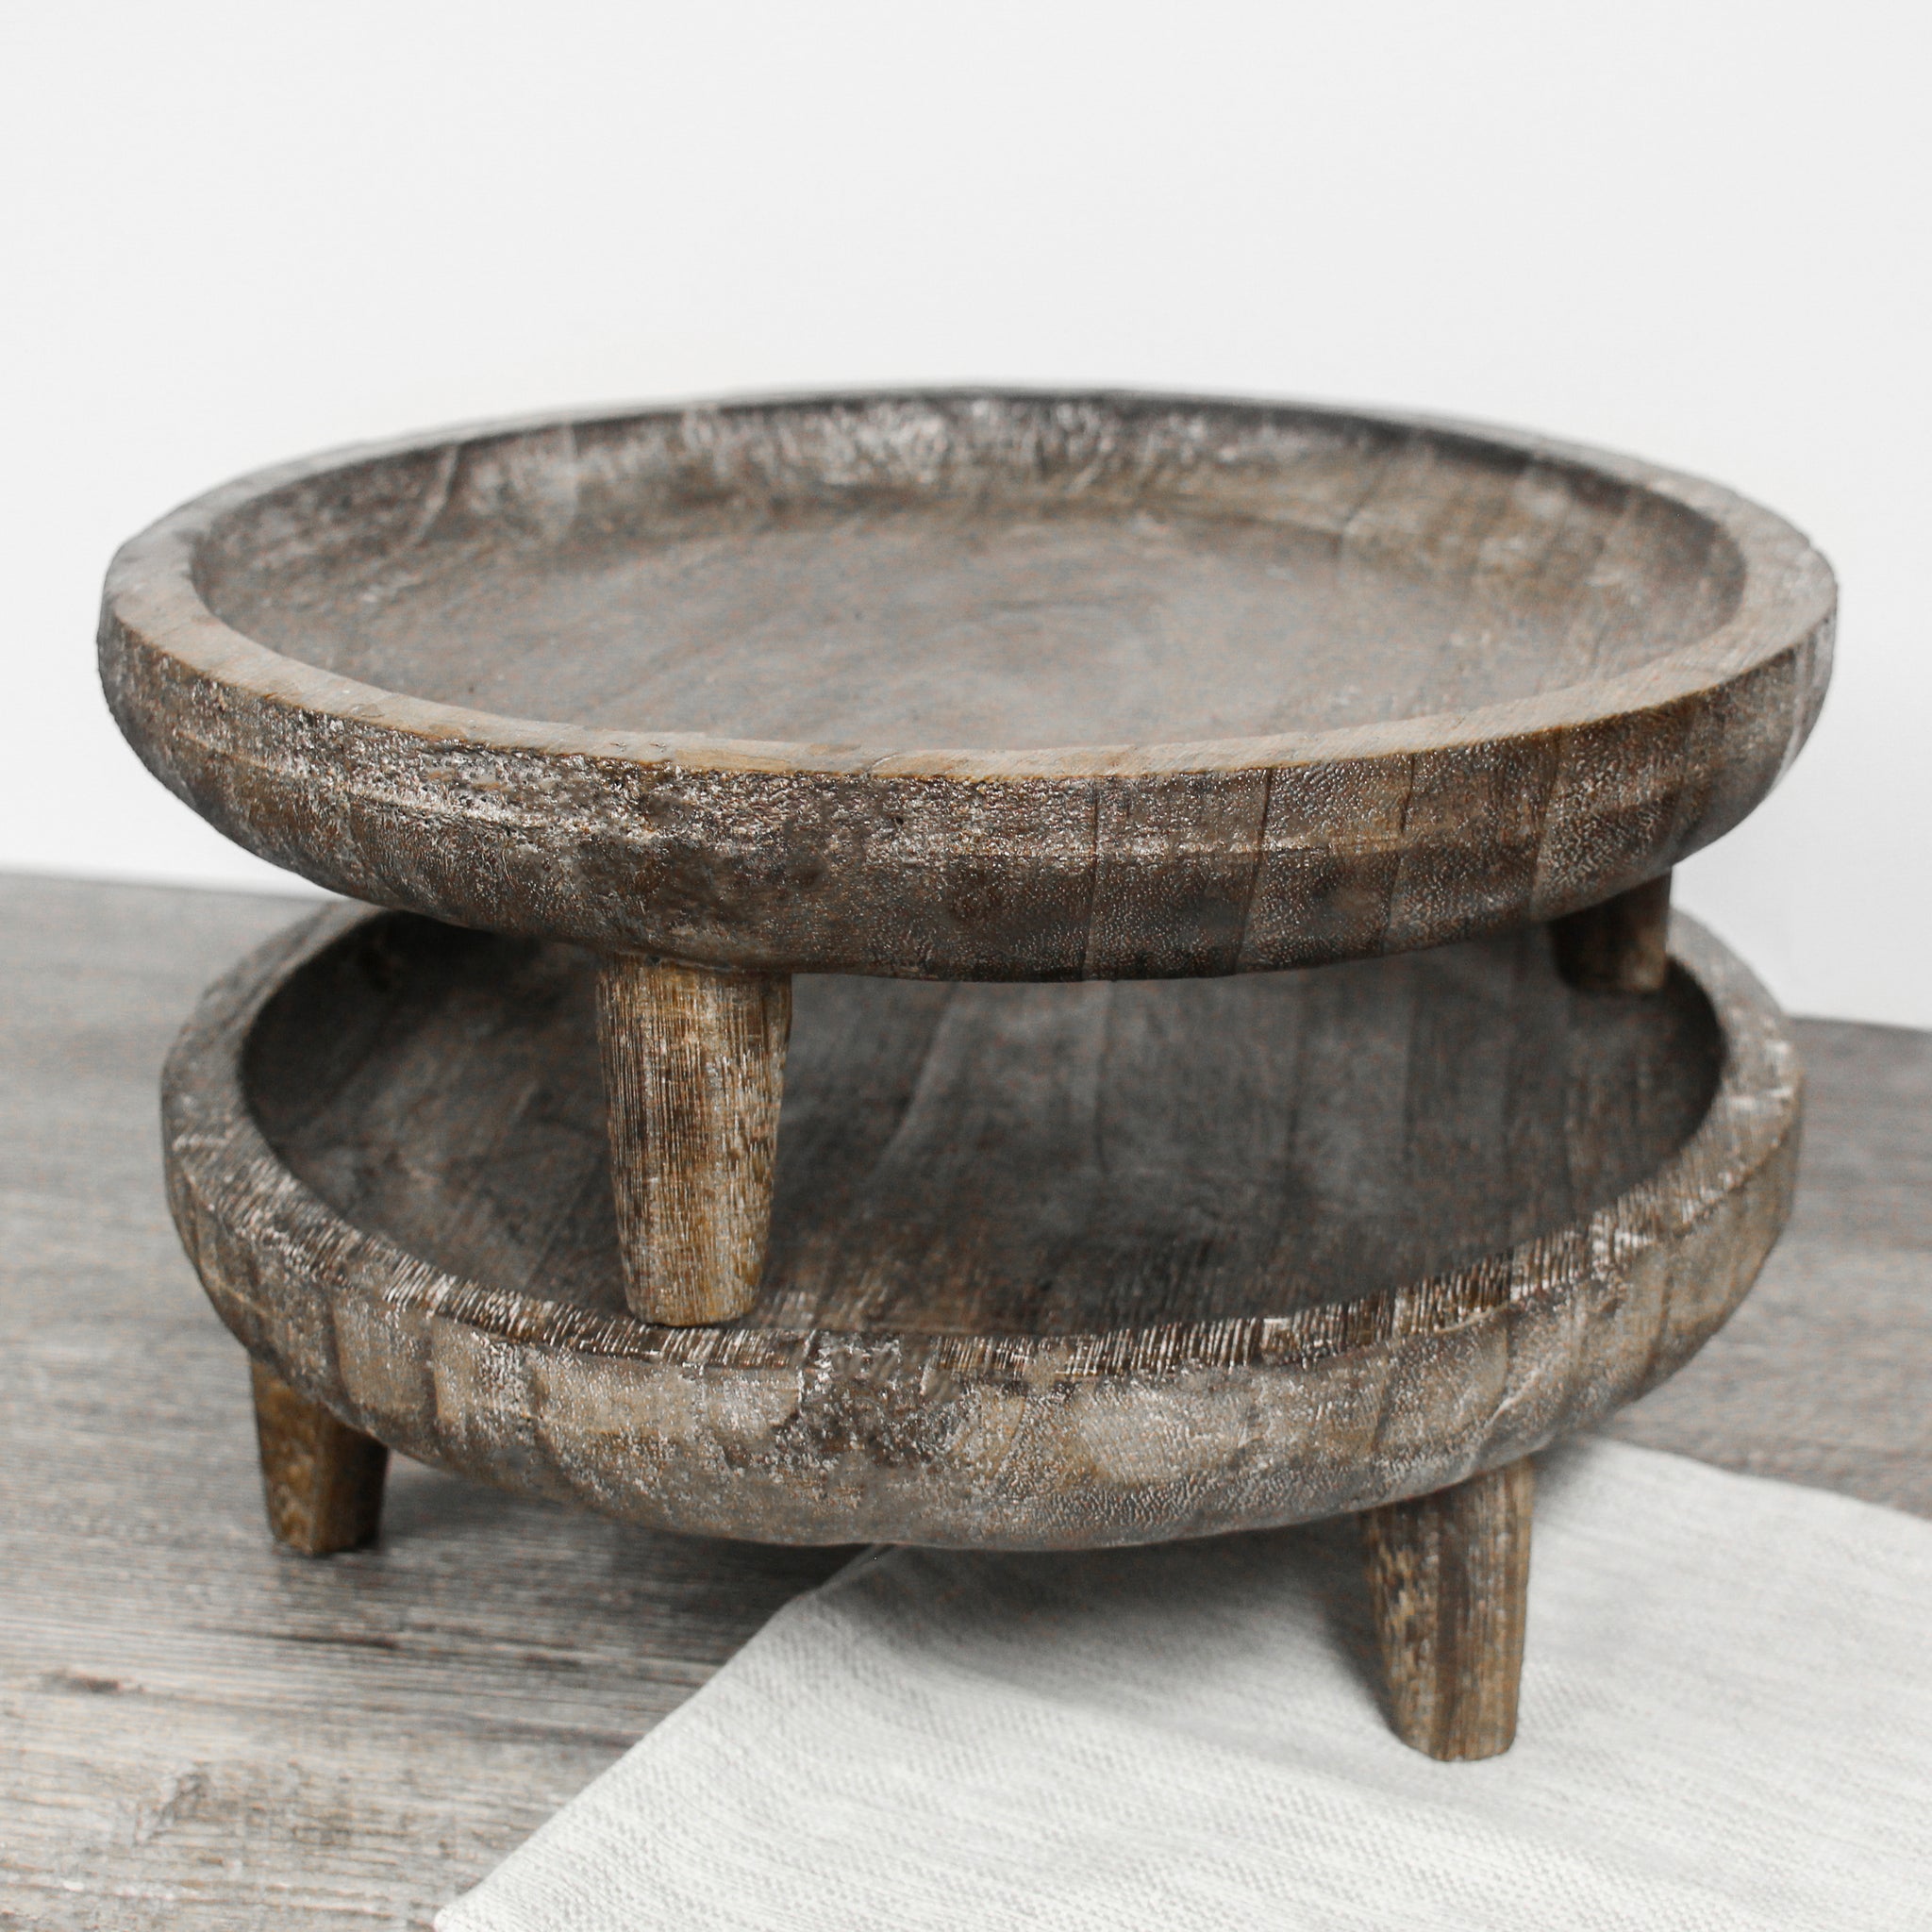 Round Wooden Tray With Legs – The Rusty Star Inc.